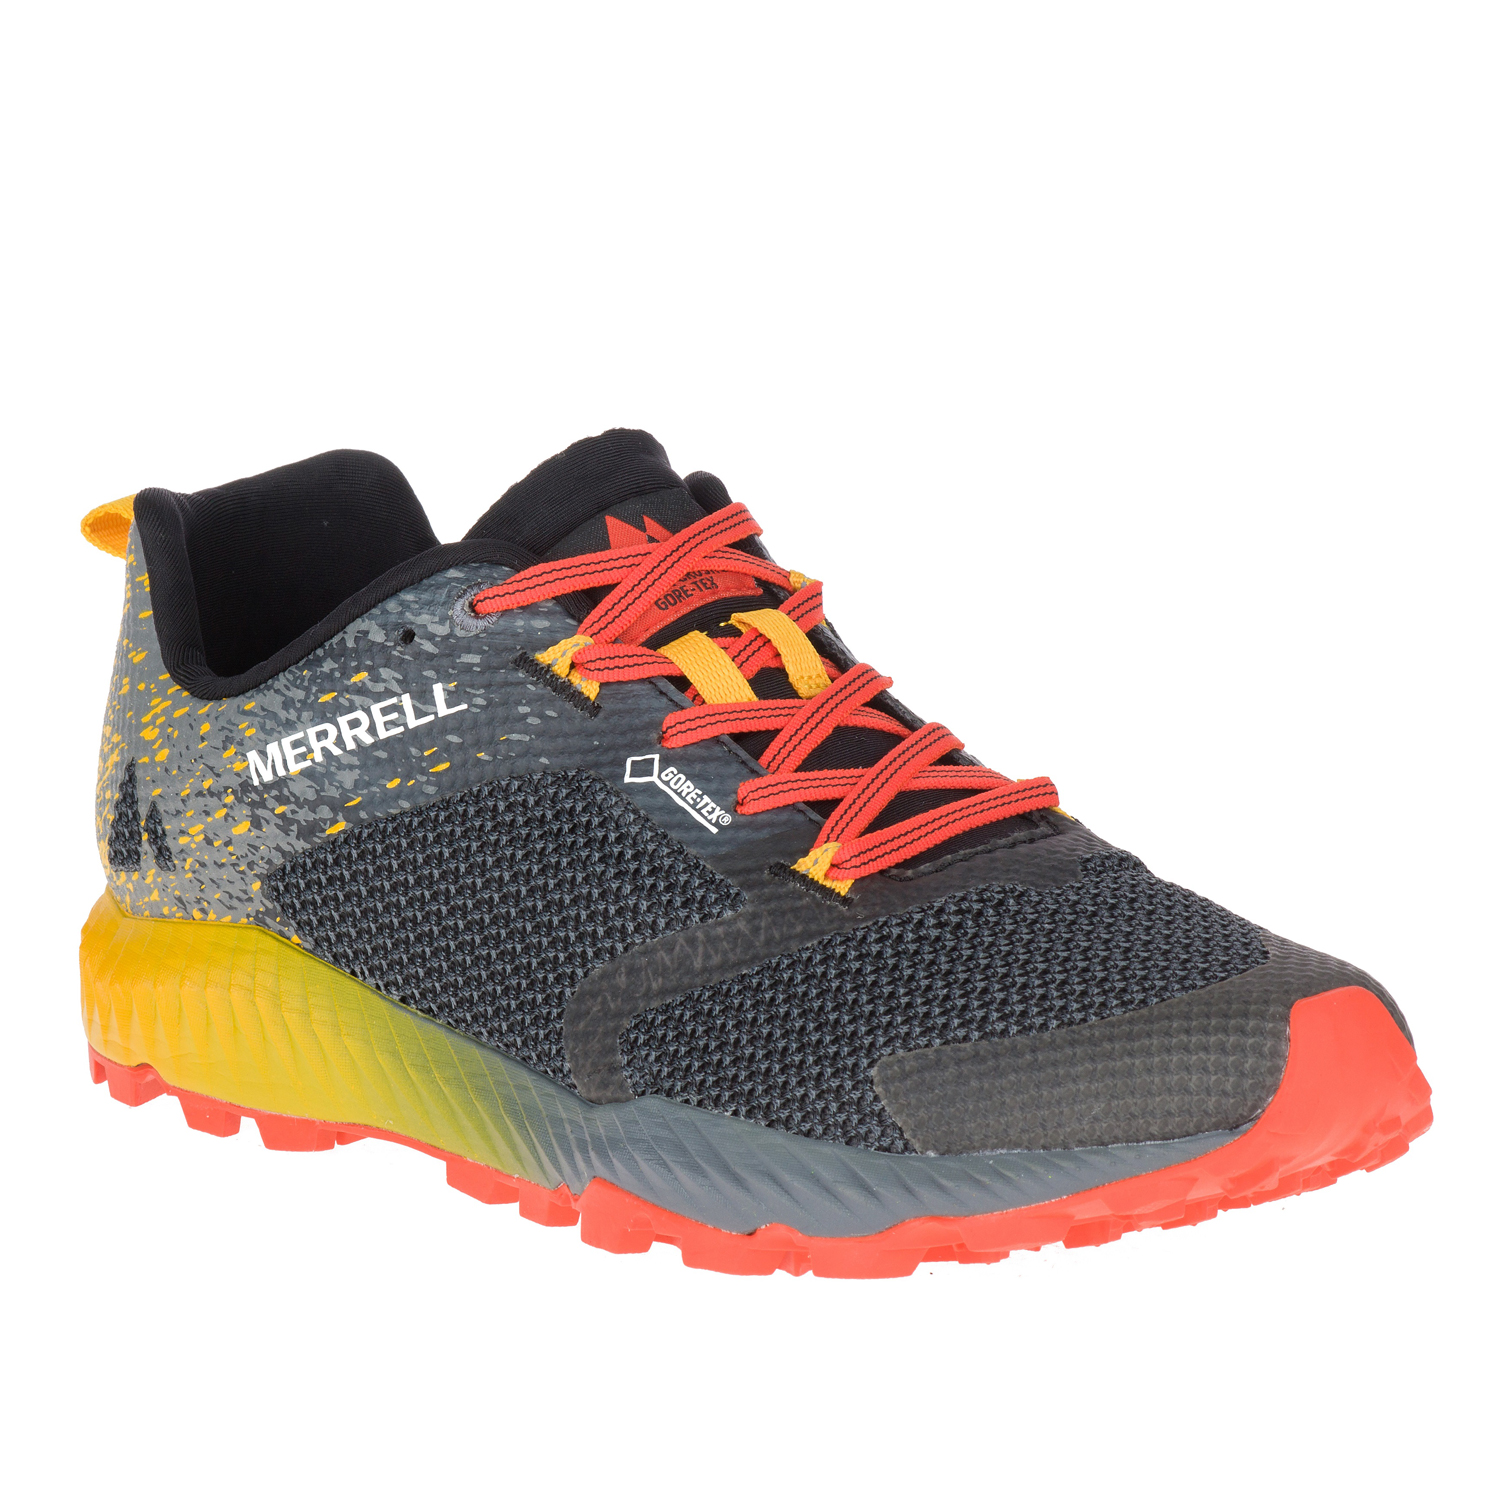 merrell all out crush 2 trail running shoes